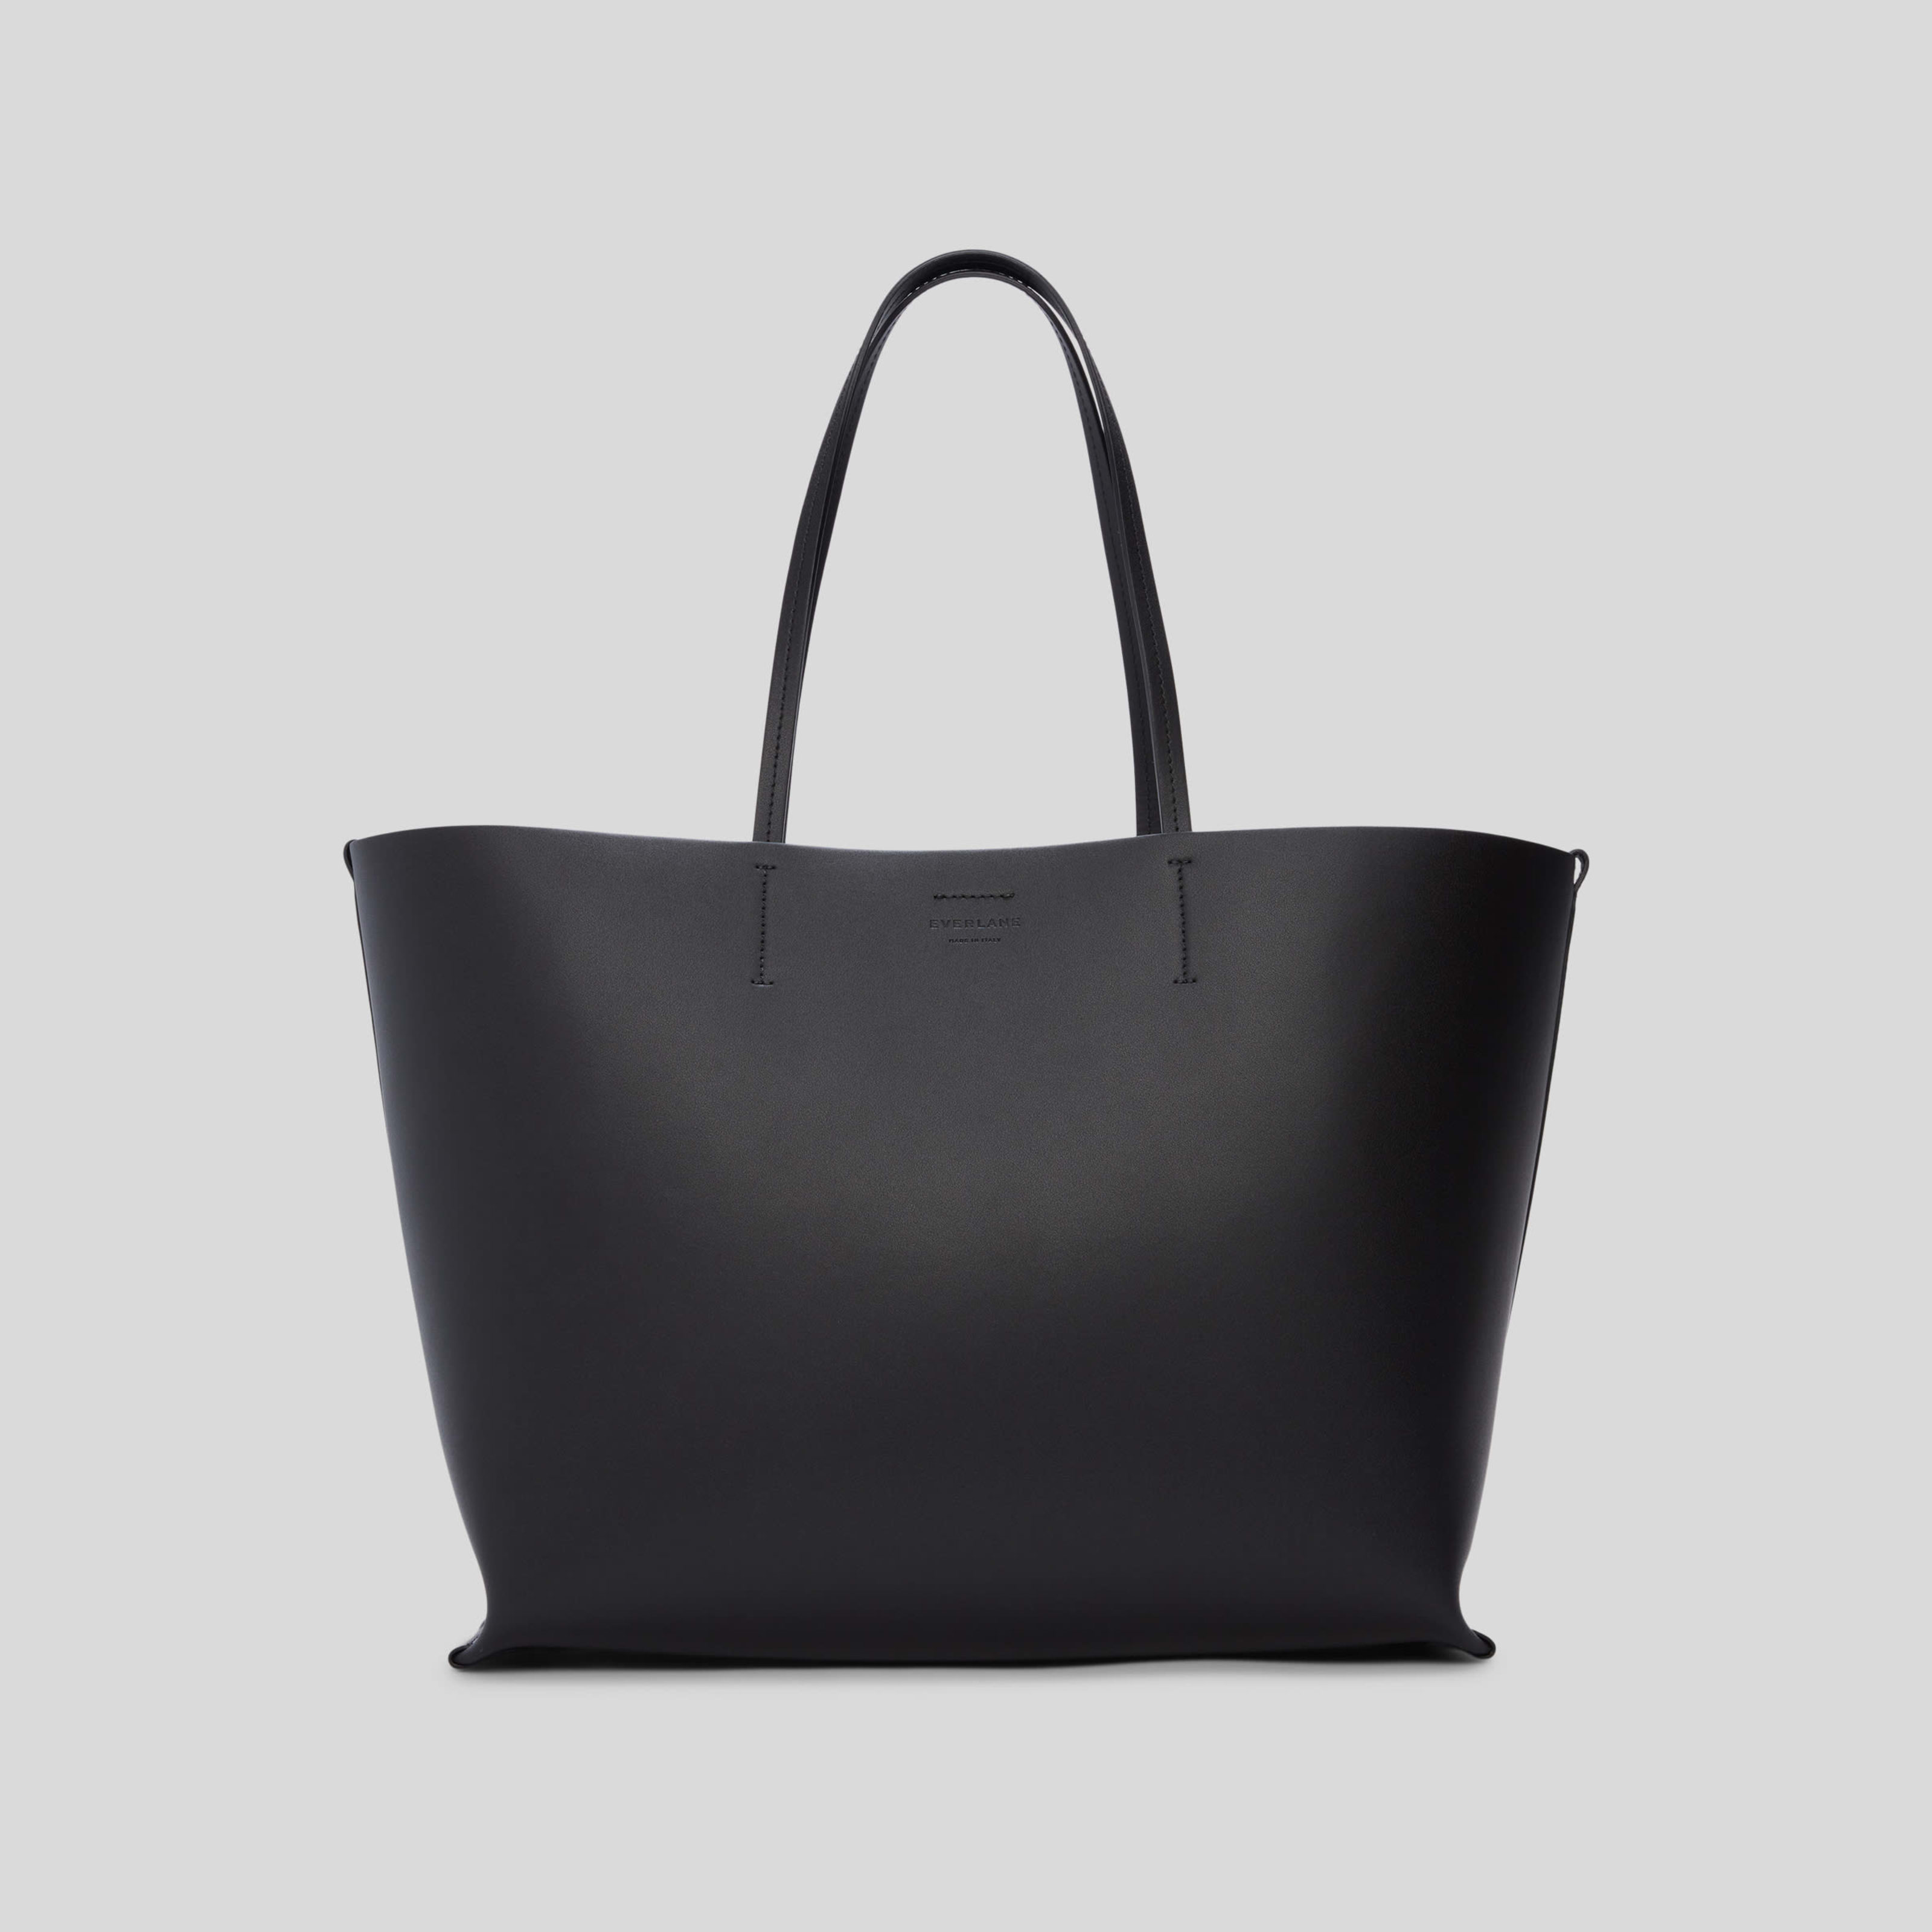 women's luxe italian leather tote bag by everlane in black